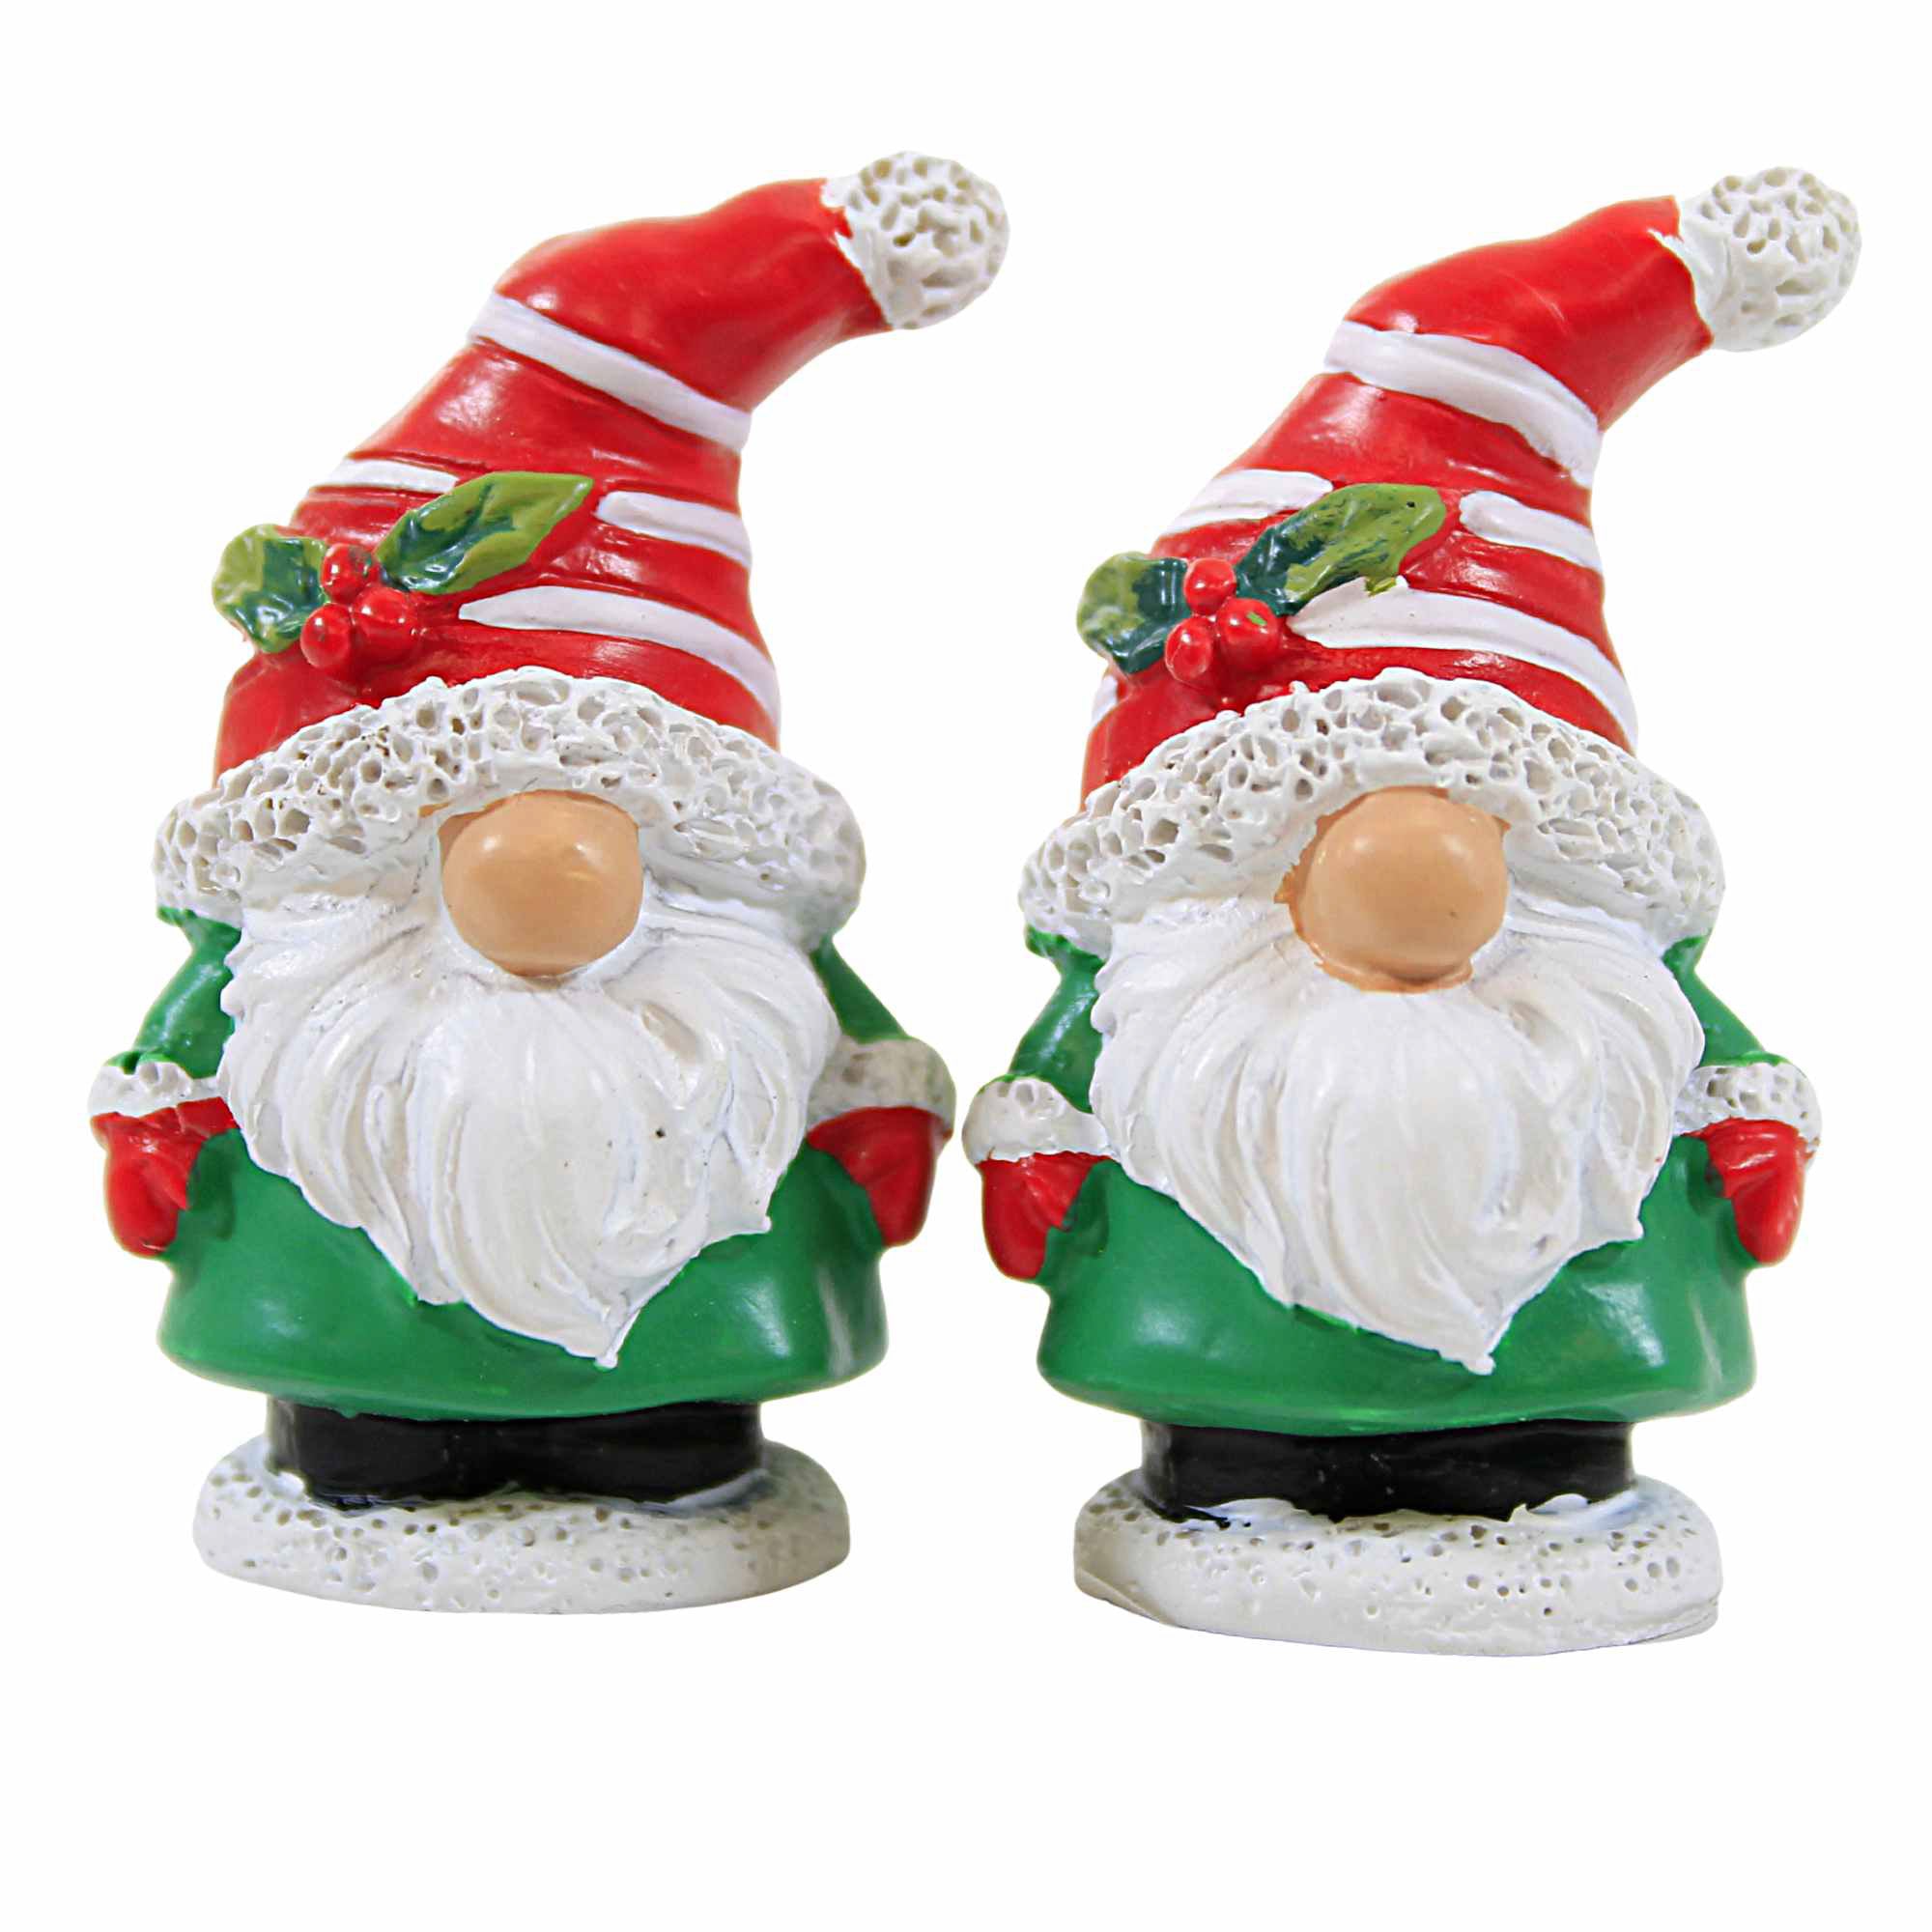 Department 56 Villages Candy Cane Gnomes - Two Village Figurines